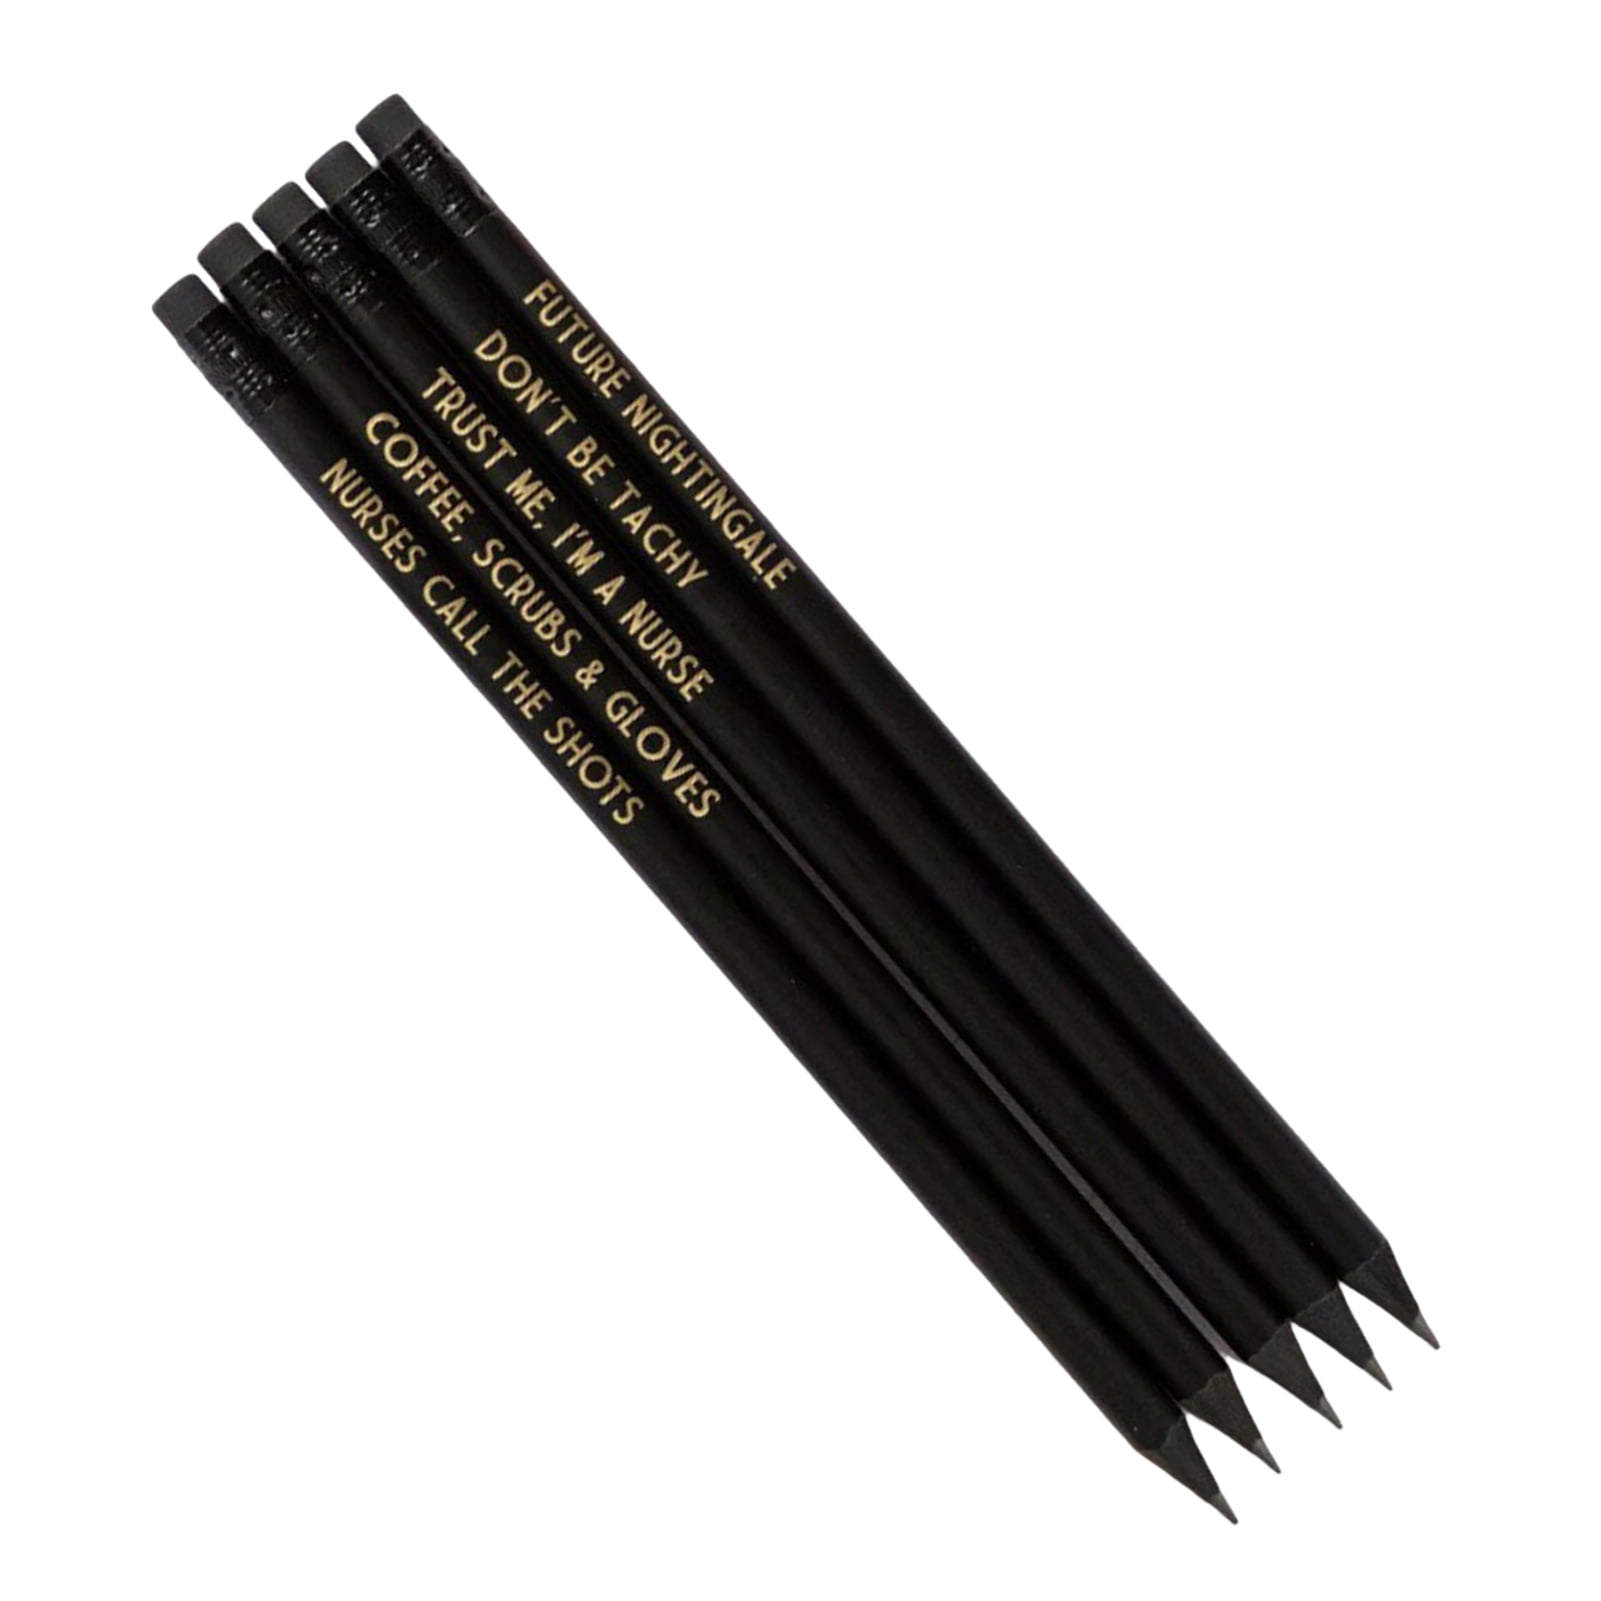 Temacd 5pcs Funny Pencils Set for Architect Black Stationery with Cheeky Slogan Adult Pun HB Pencils for Students Employees